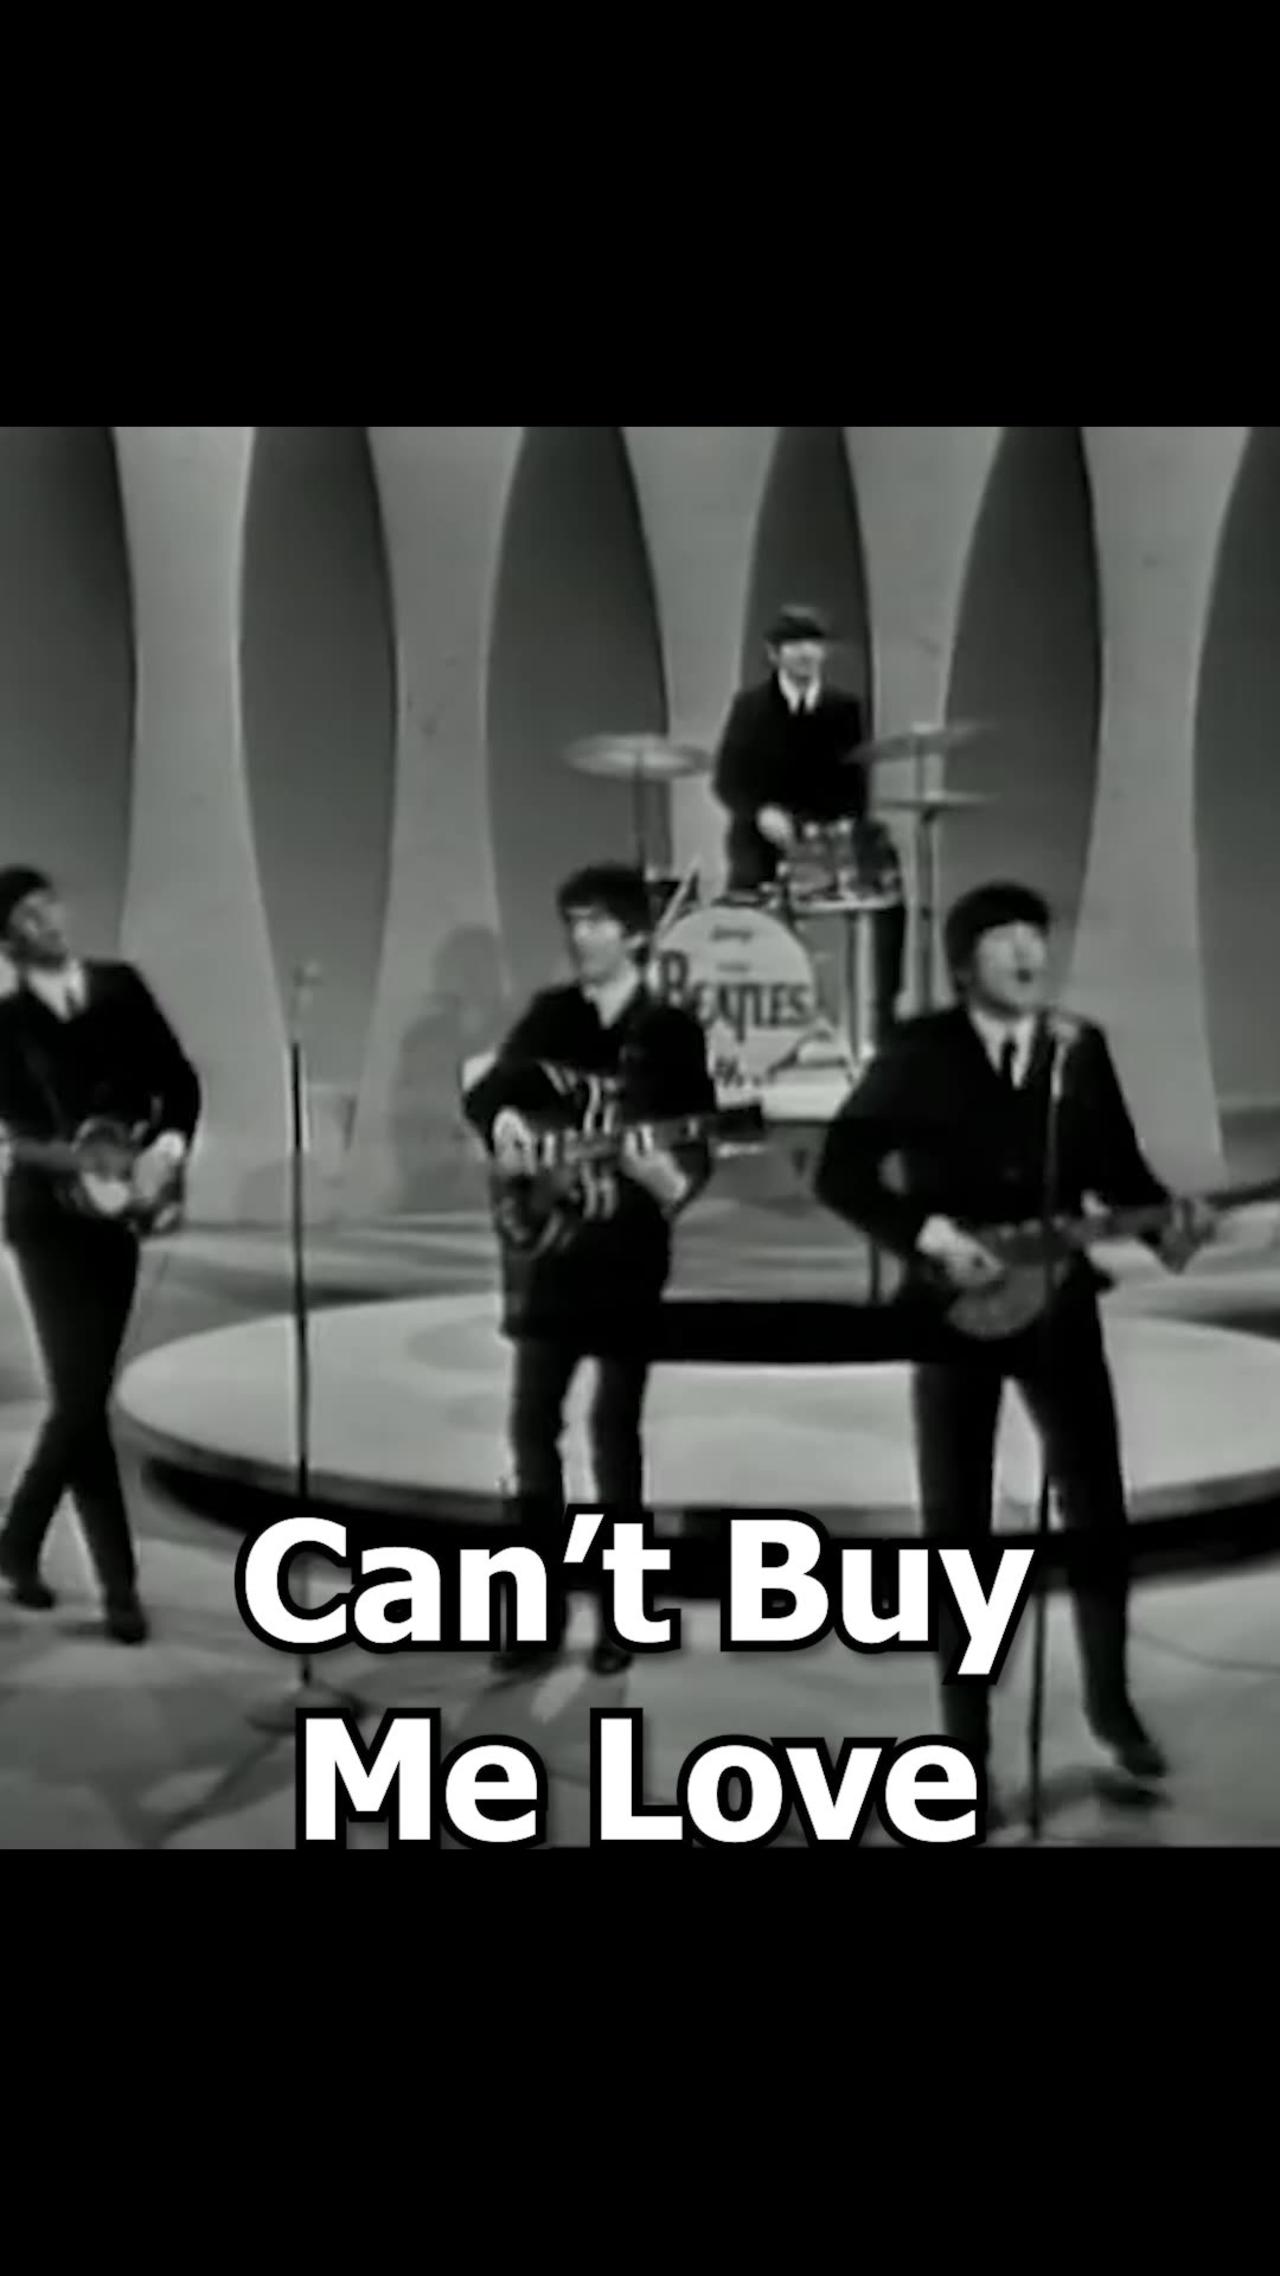 THE BEATLES' Single CAN'T BUY ME LOVE Goes To #1! 💽 - April 4, 1964